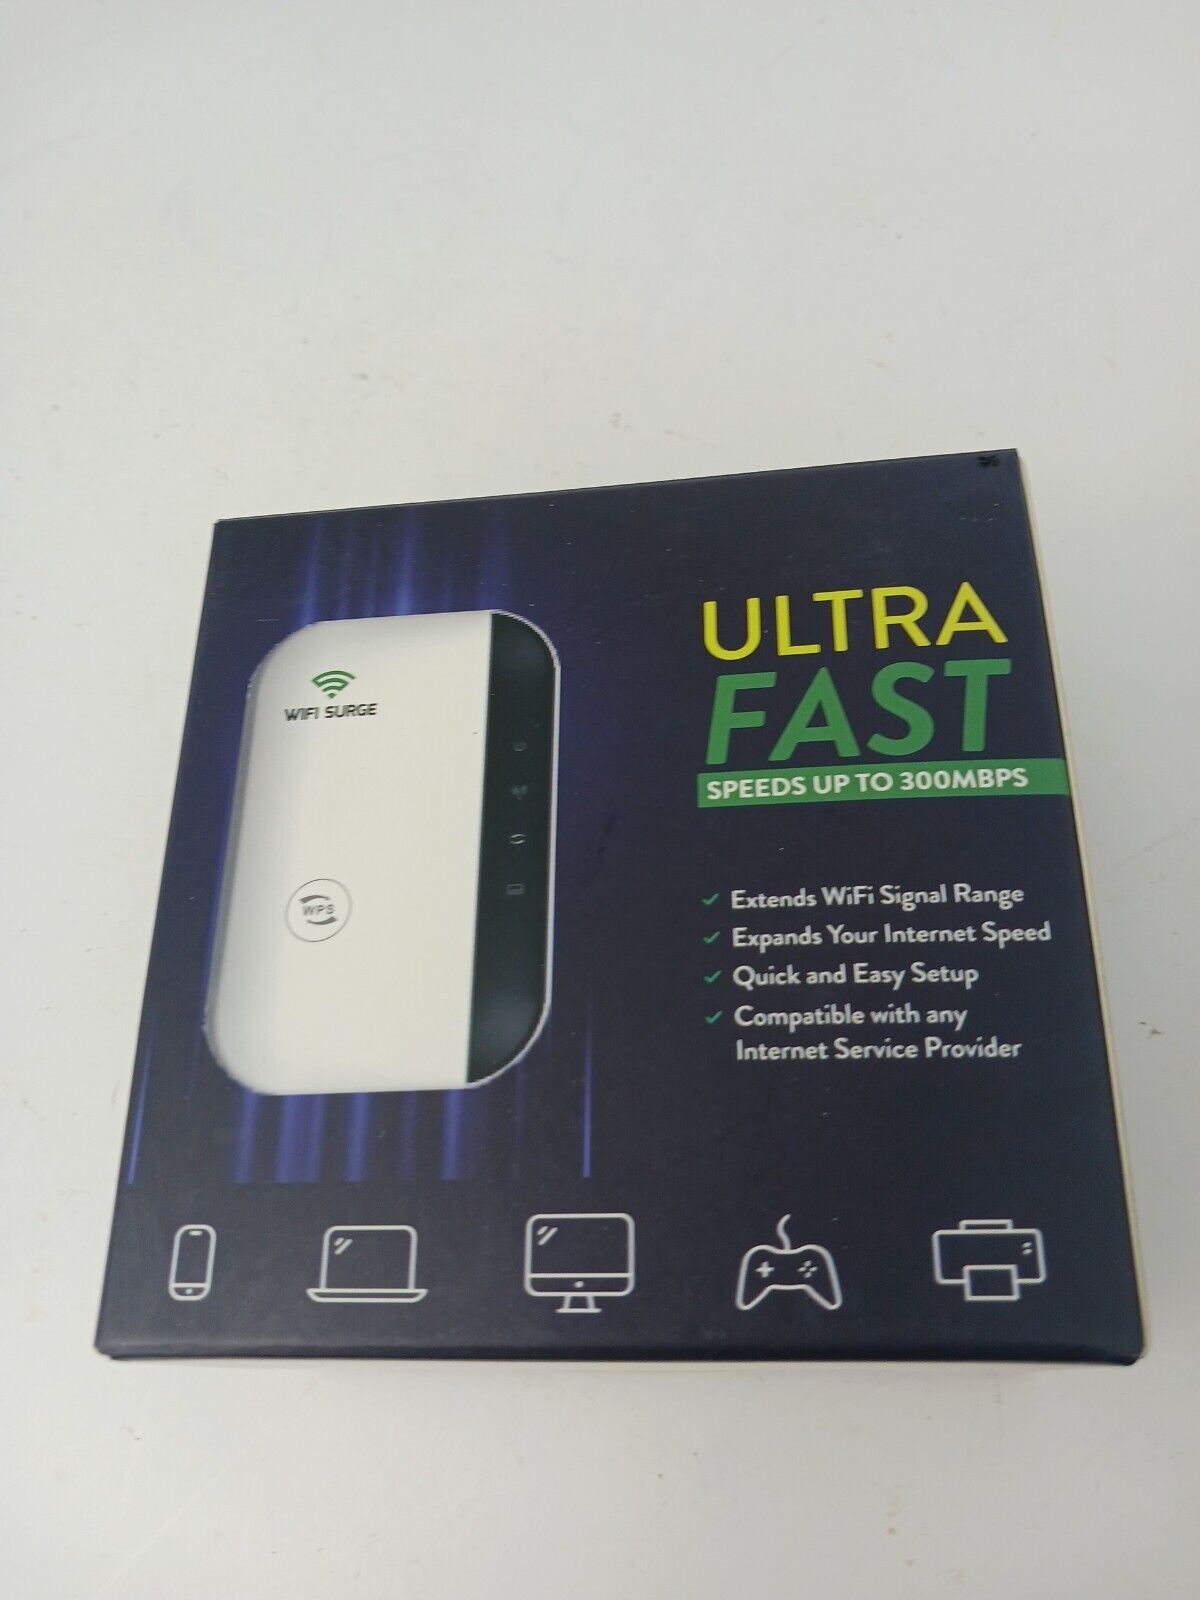 Wifi Surge Ultra Fast, Improves Wireless Coverage,Speeds Up to 300MBPS NEW NIB